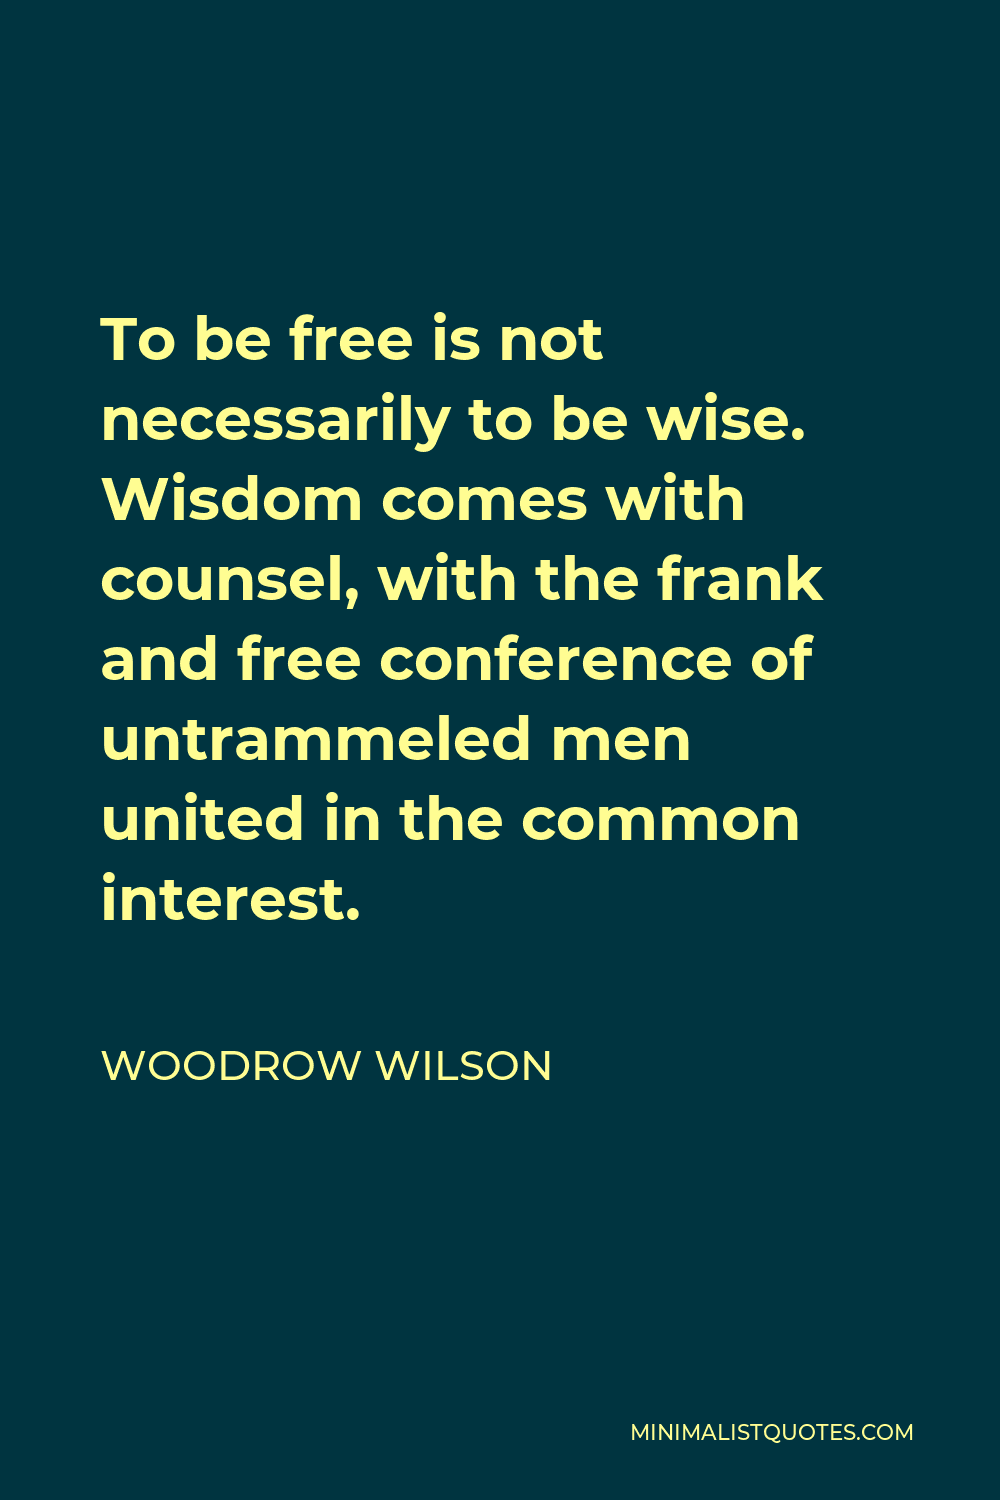 Woodrow Wilson Quote - To be free is not necessarily to be wise. Wisdom comes with counsel, with the frank and free conference of untrammeled men united in the common interest.